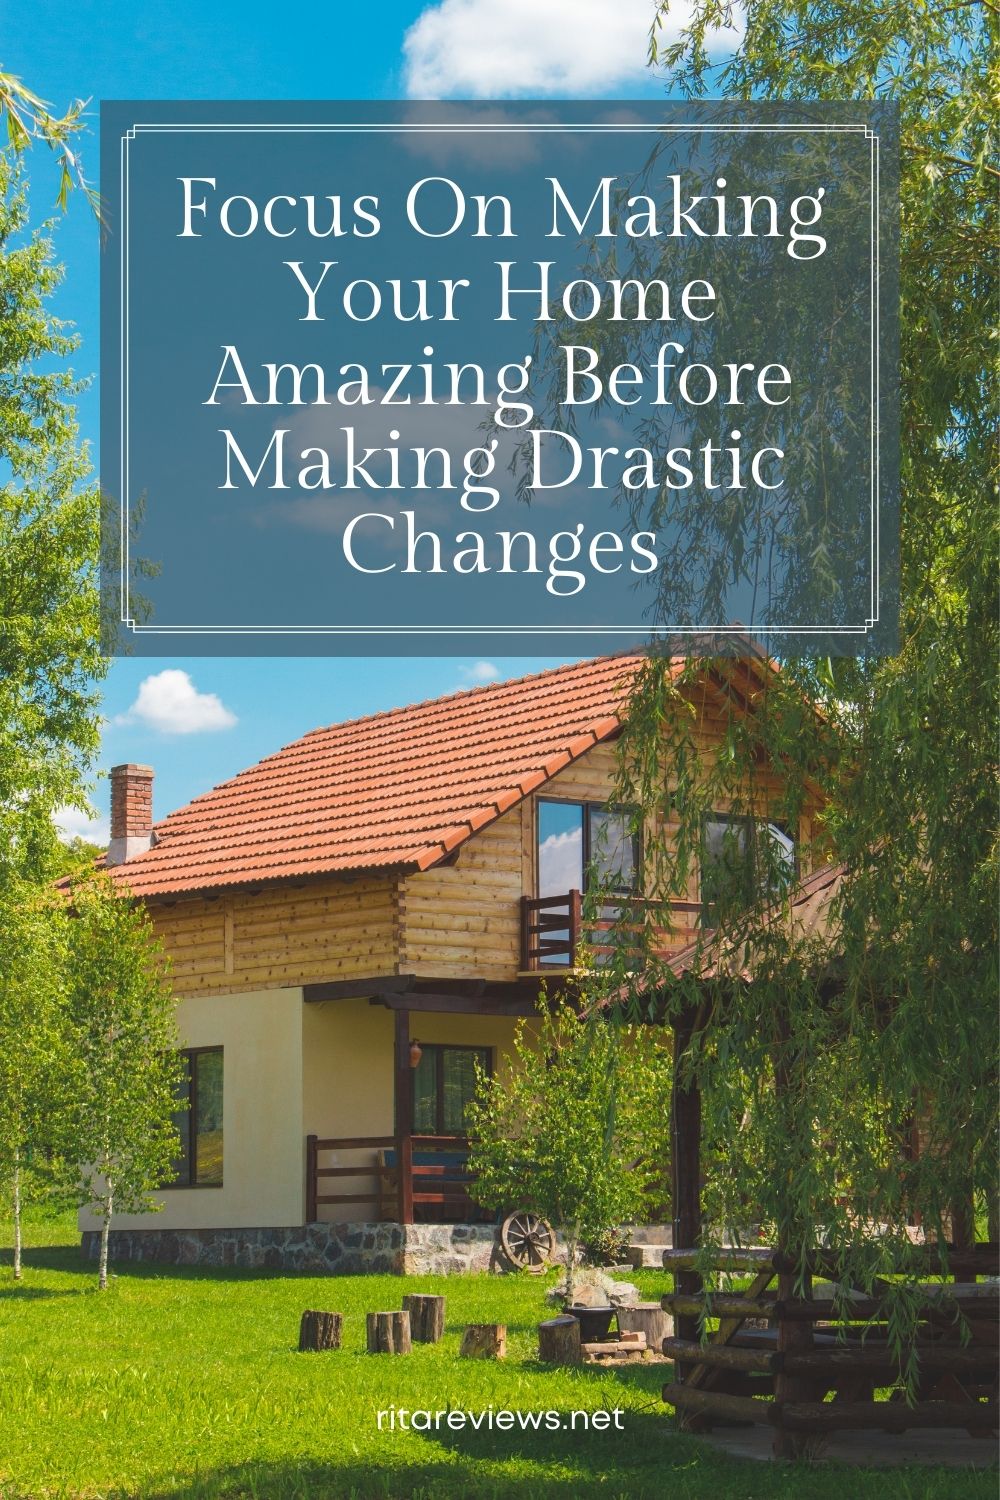 Focus On Making Your Home Amazing Before Making Drastic Changes